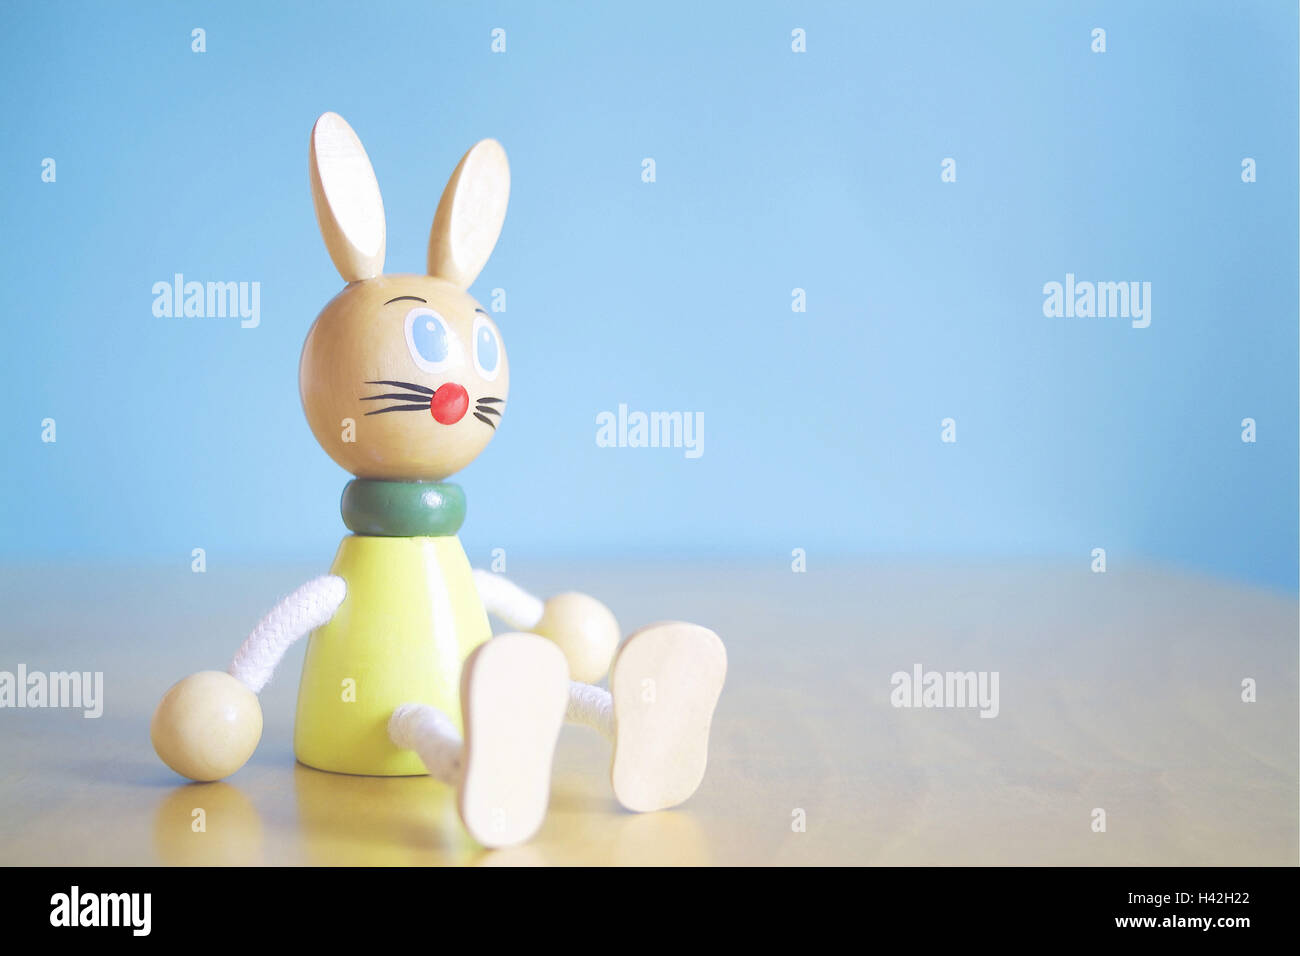 Easter decoration, wooden figure, hare, hare's figure, leveret, figure, wooden, Easter bunny, toys, wooden toys, toys, sit, childishly, nicely, childhood, Easter, decoration, decoration object, Still life, product photography Stock Photo